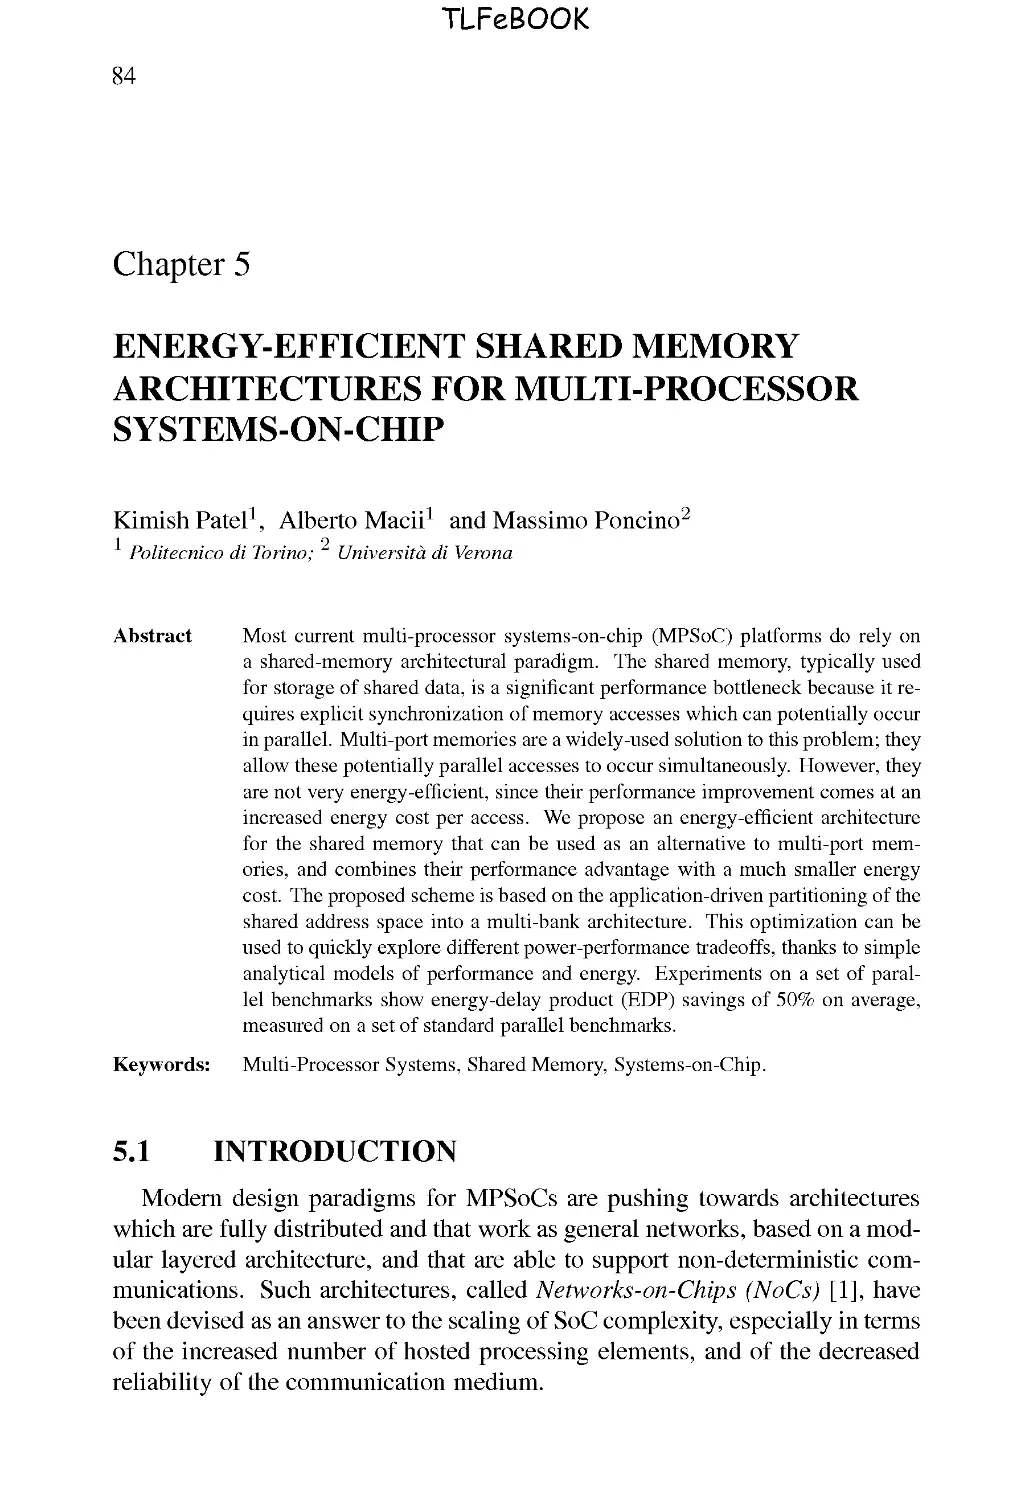 5. ENERGY-EFFICIENT SHARED MEMORY ARCHITECTURES FOR MULTI-PROCESSOR SYSTEMS-ON-CHIP